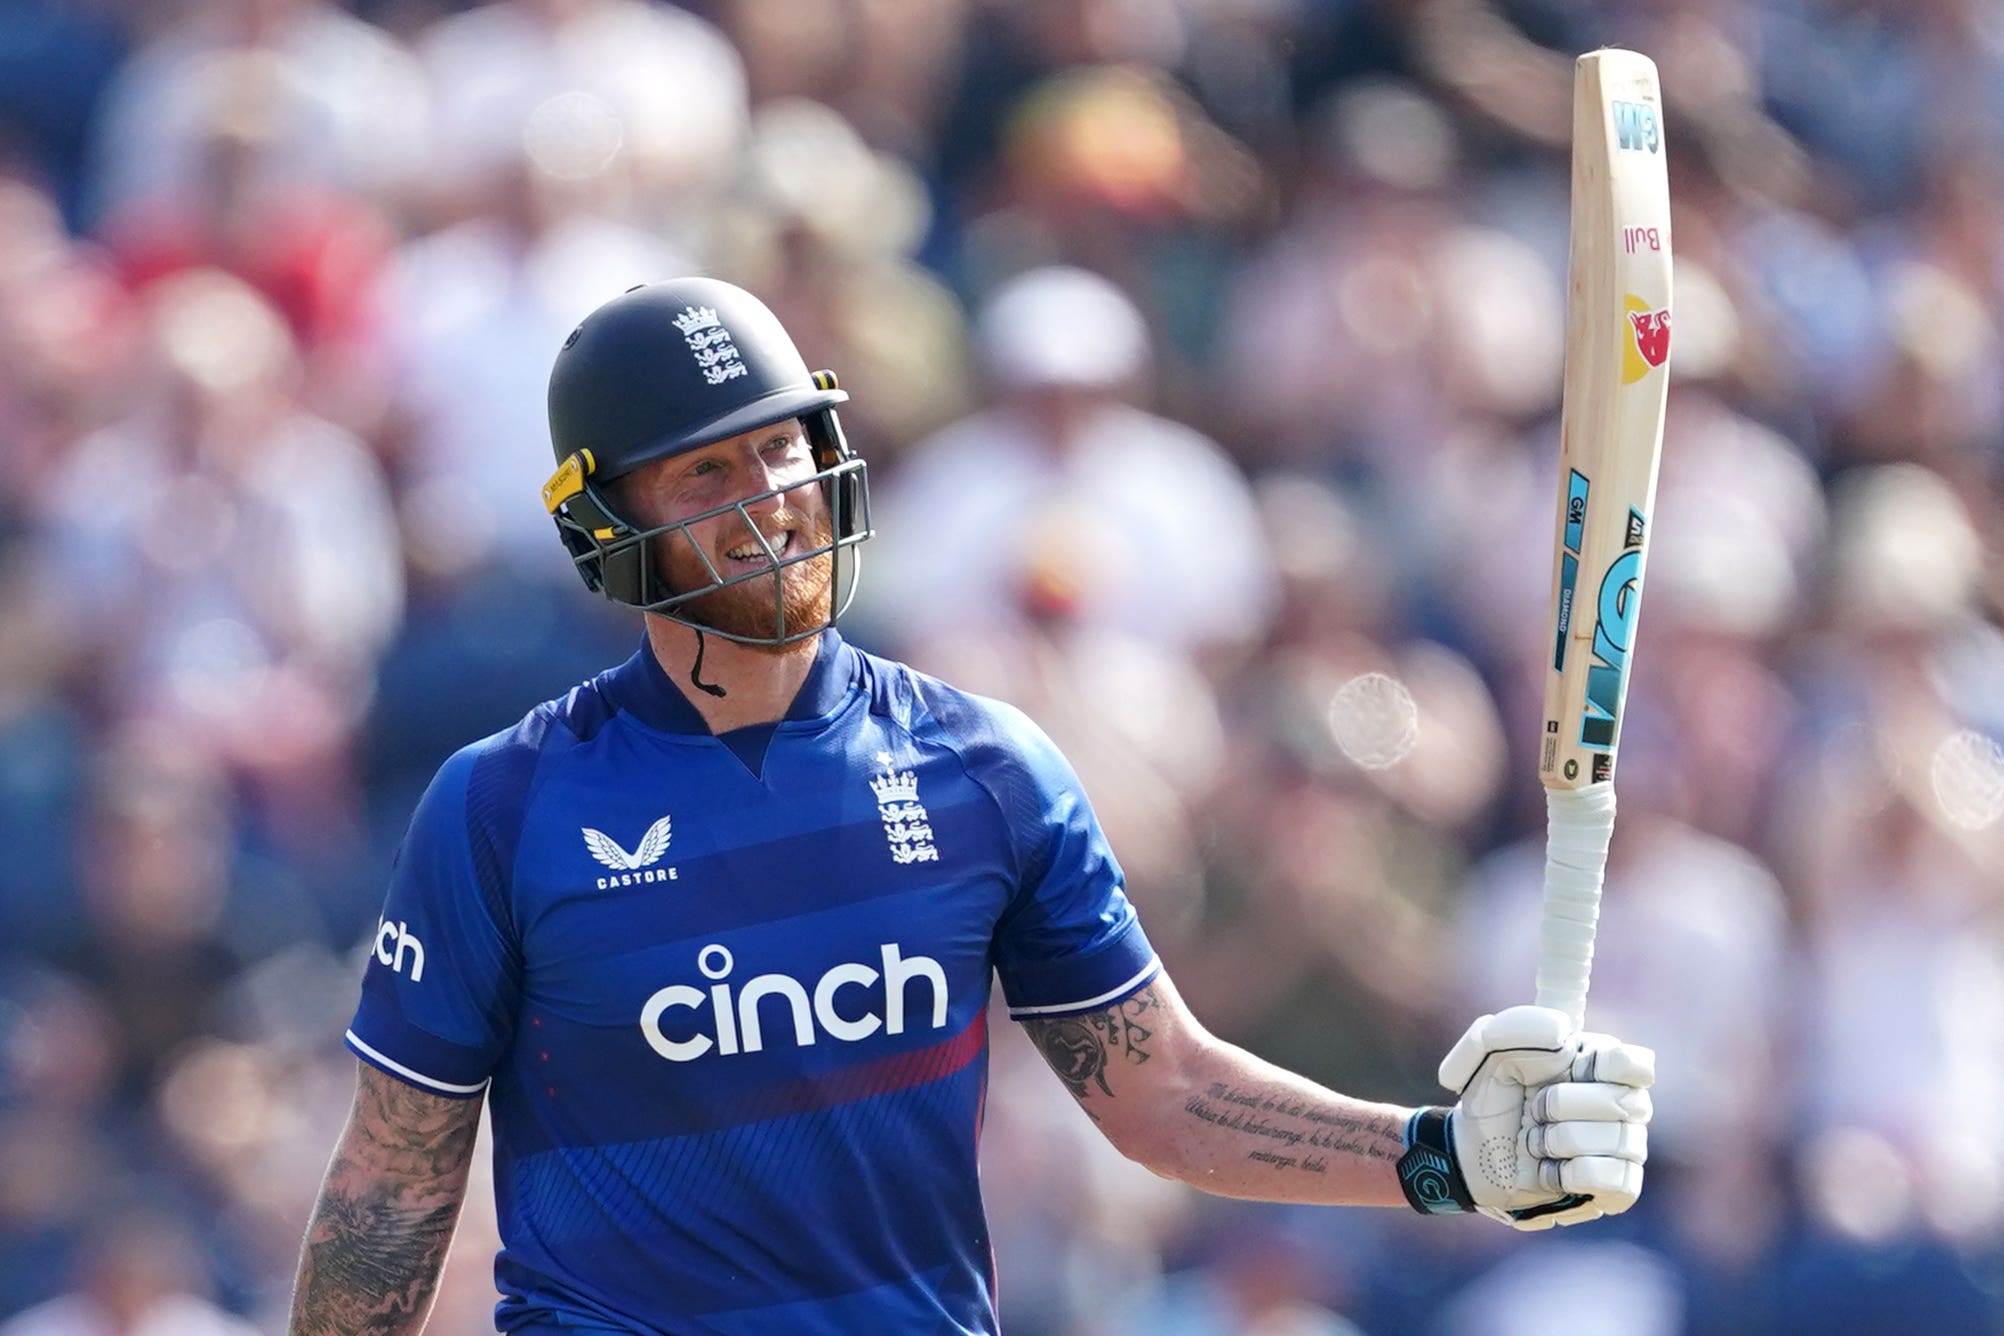 Ben Stokes starred for England in Cardiff (Joe Giddens/PA)